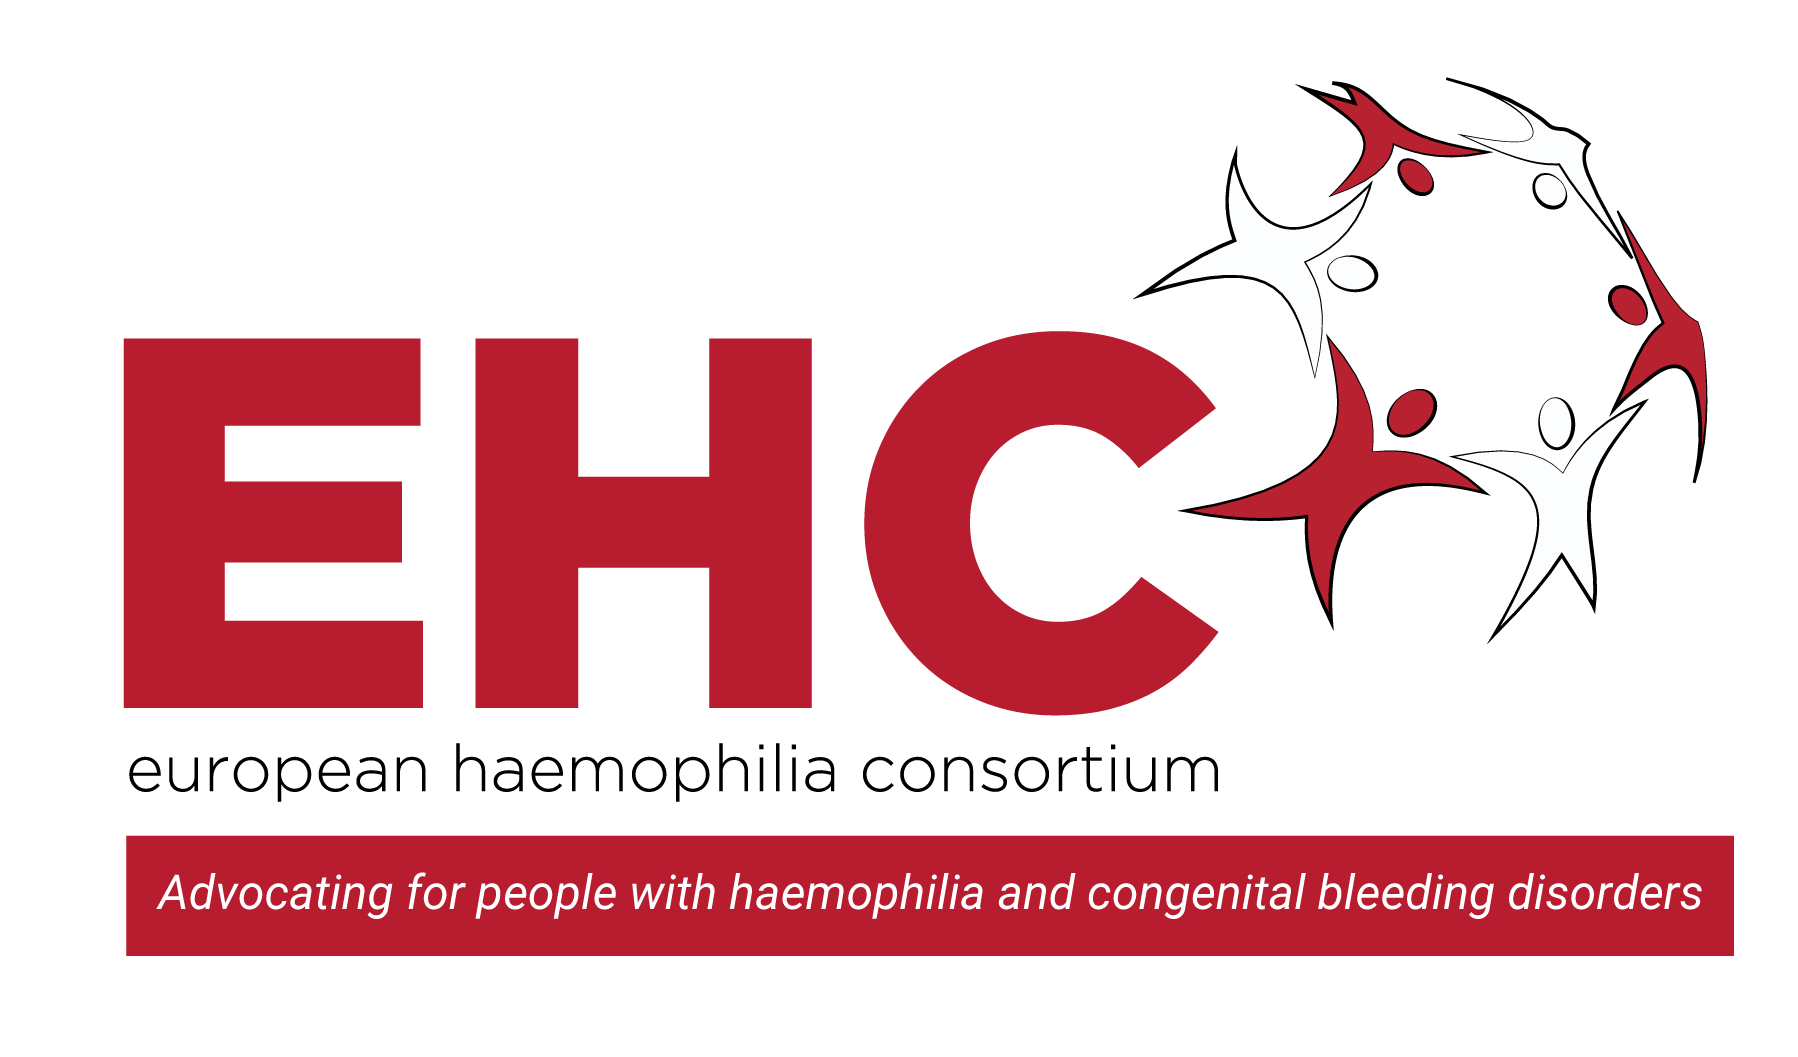 EHC – European Haemophilia Consortium - Advocating for people with haemophilia and congenital bleeding disorders - /report-of-the-penrose-enquiry-gets-published/